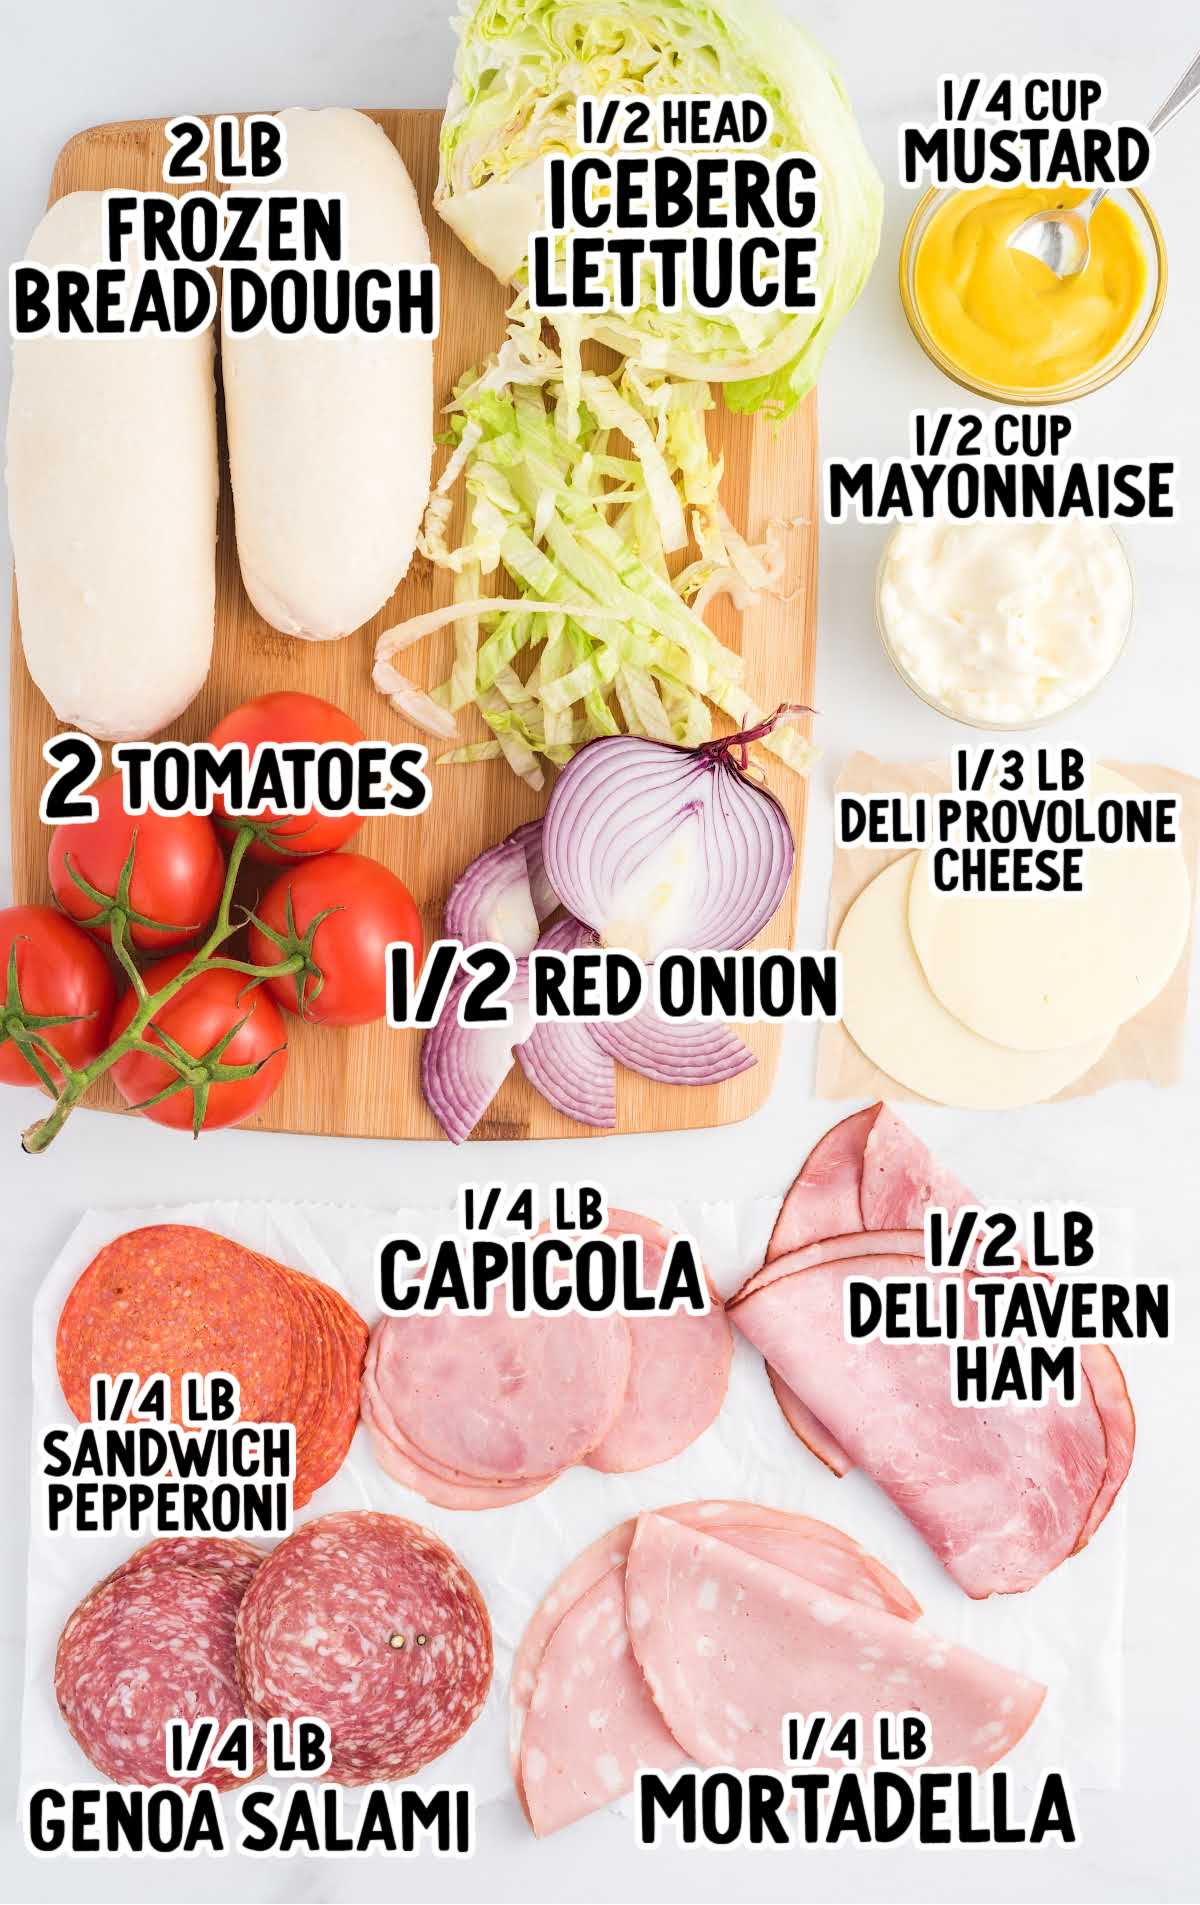 Party Sub raw ingredients that are labeled